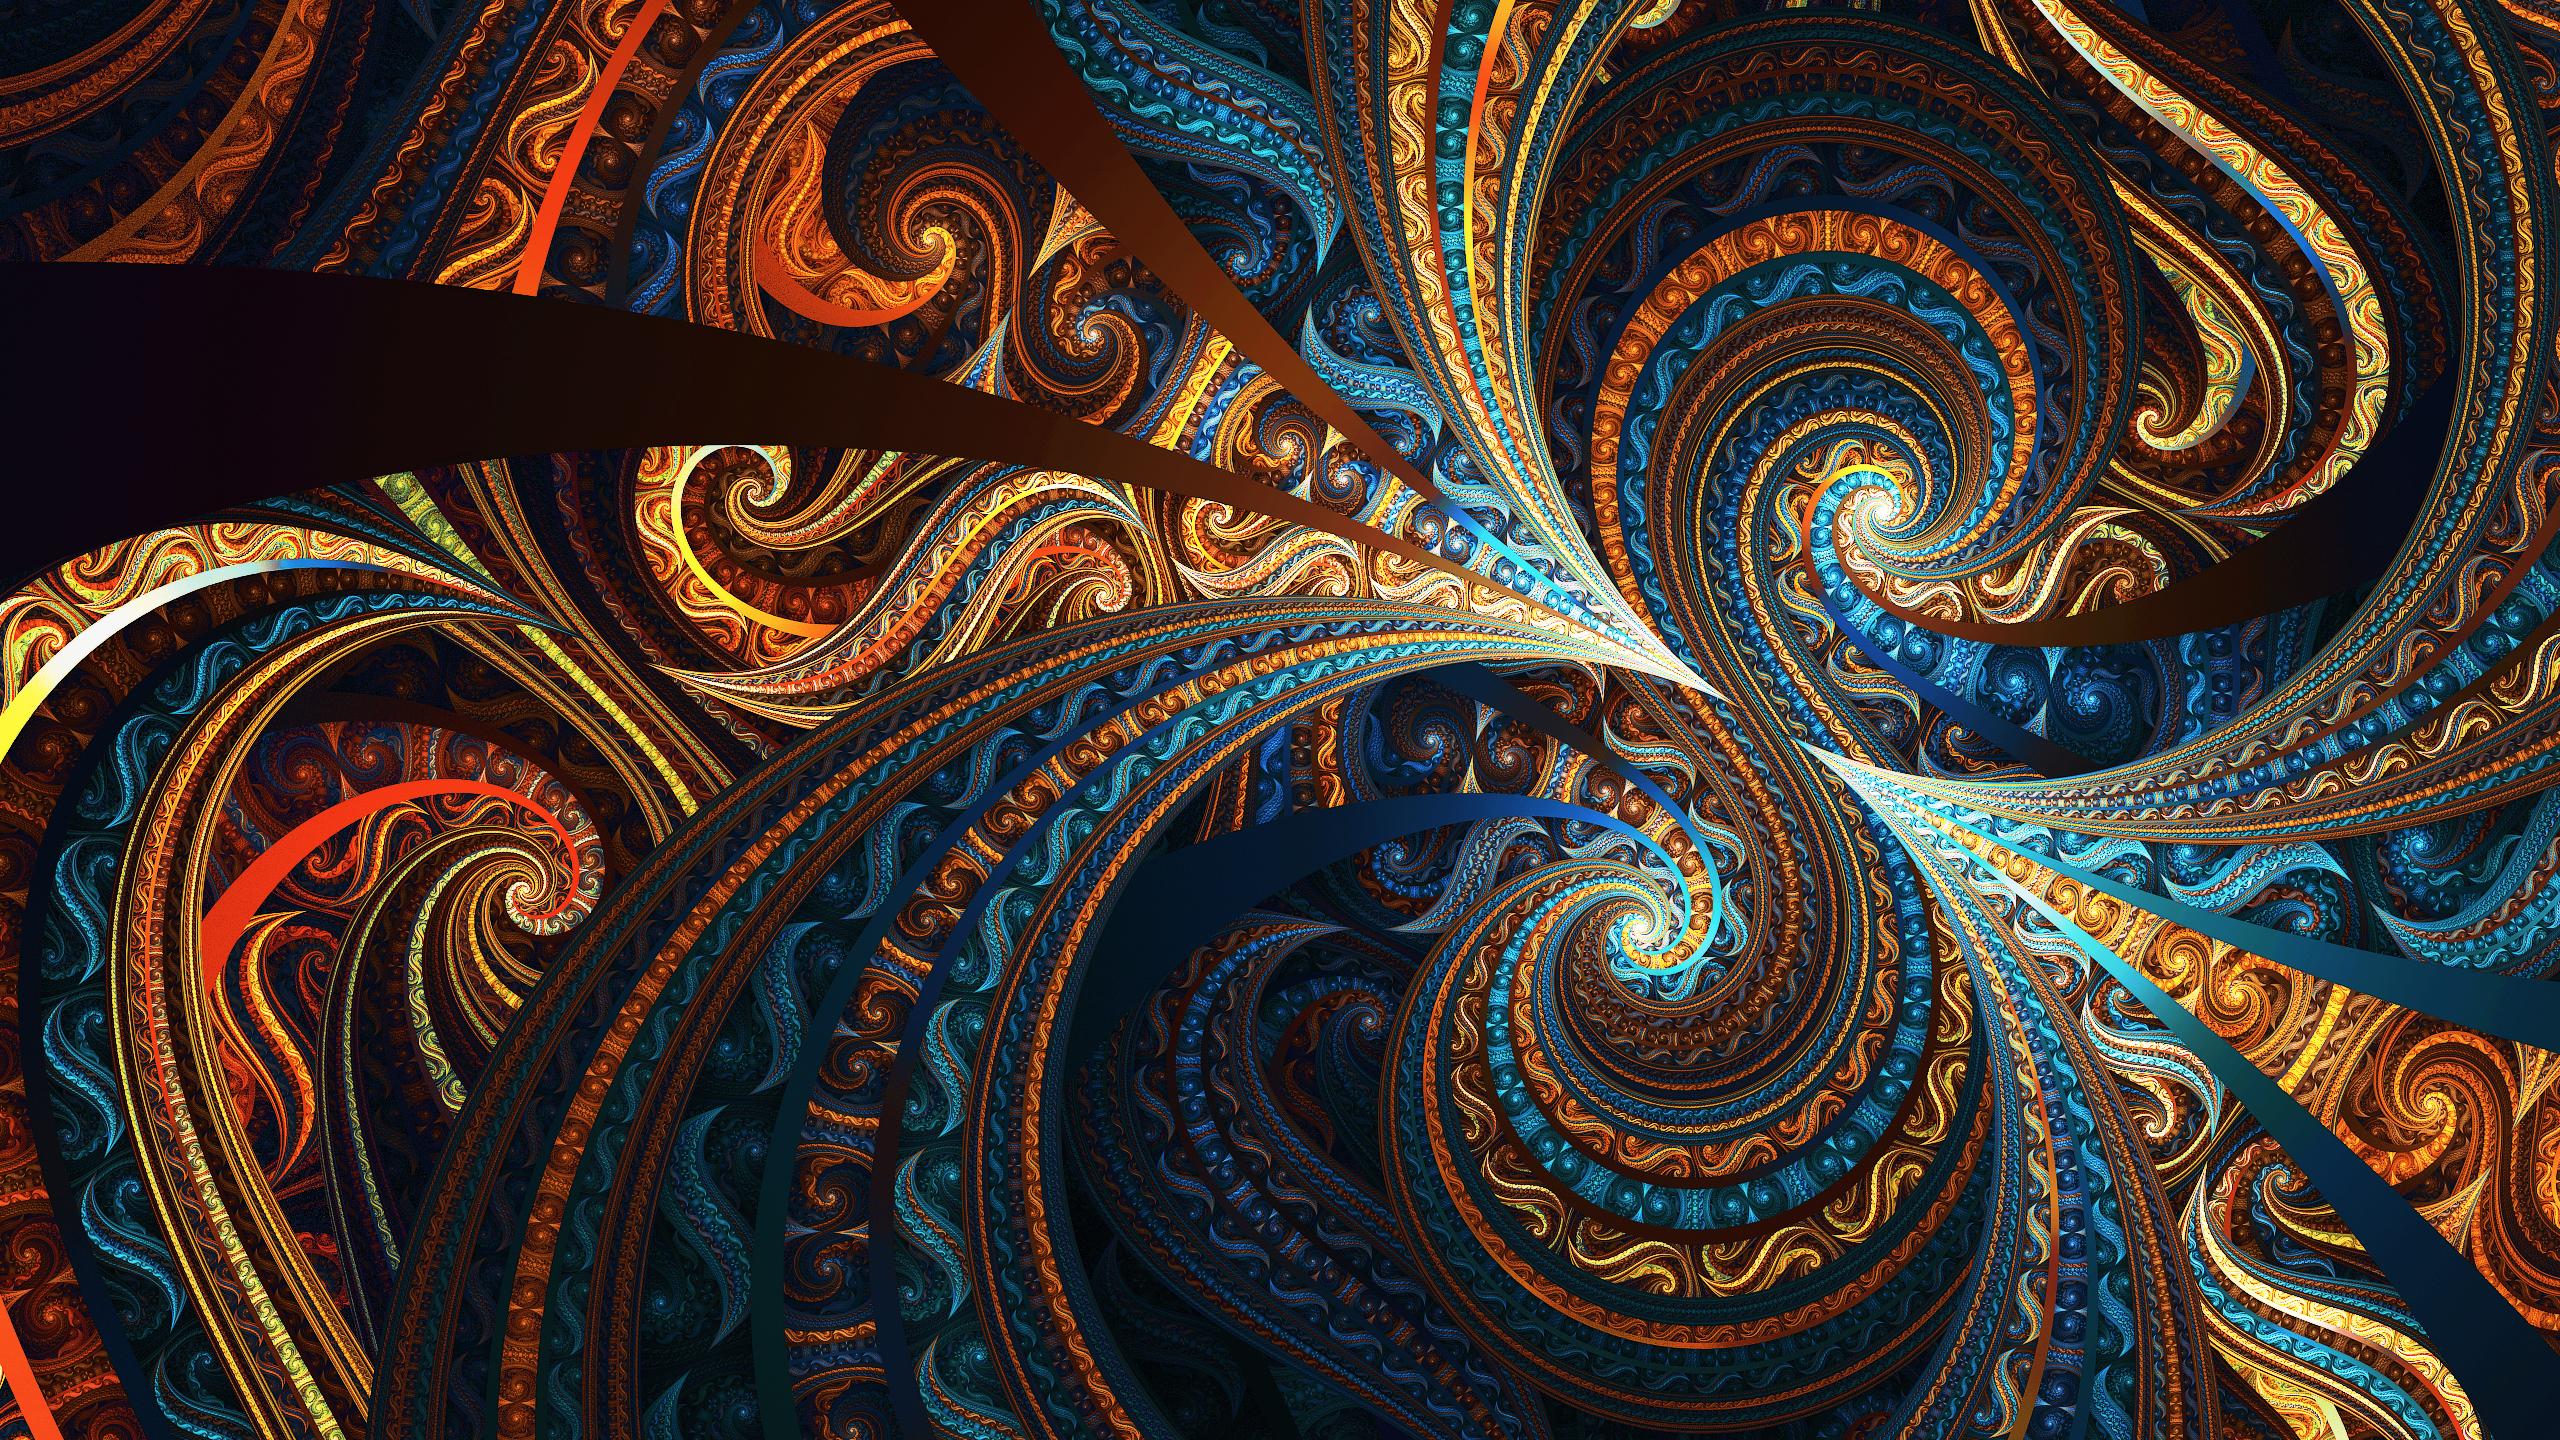 Abstract Fractal Wallpapers